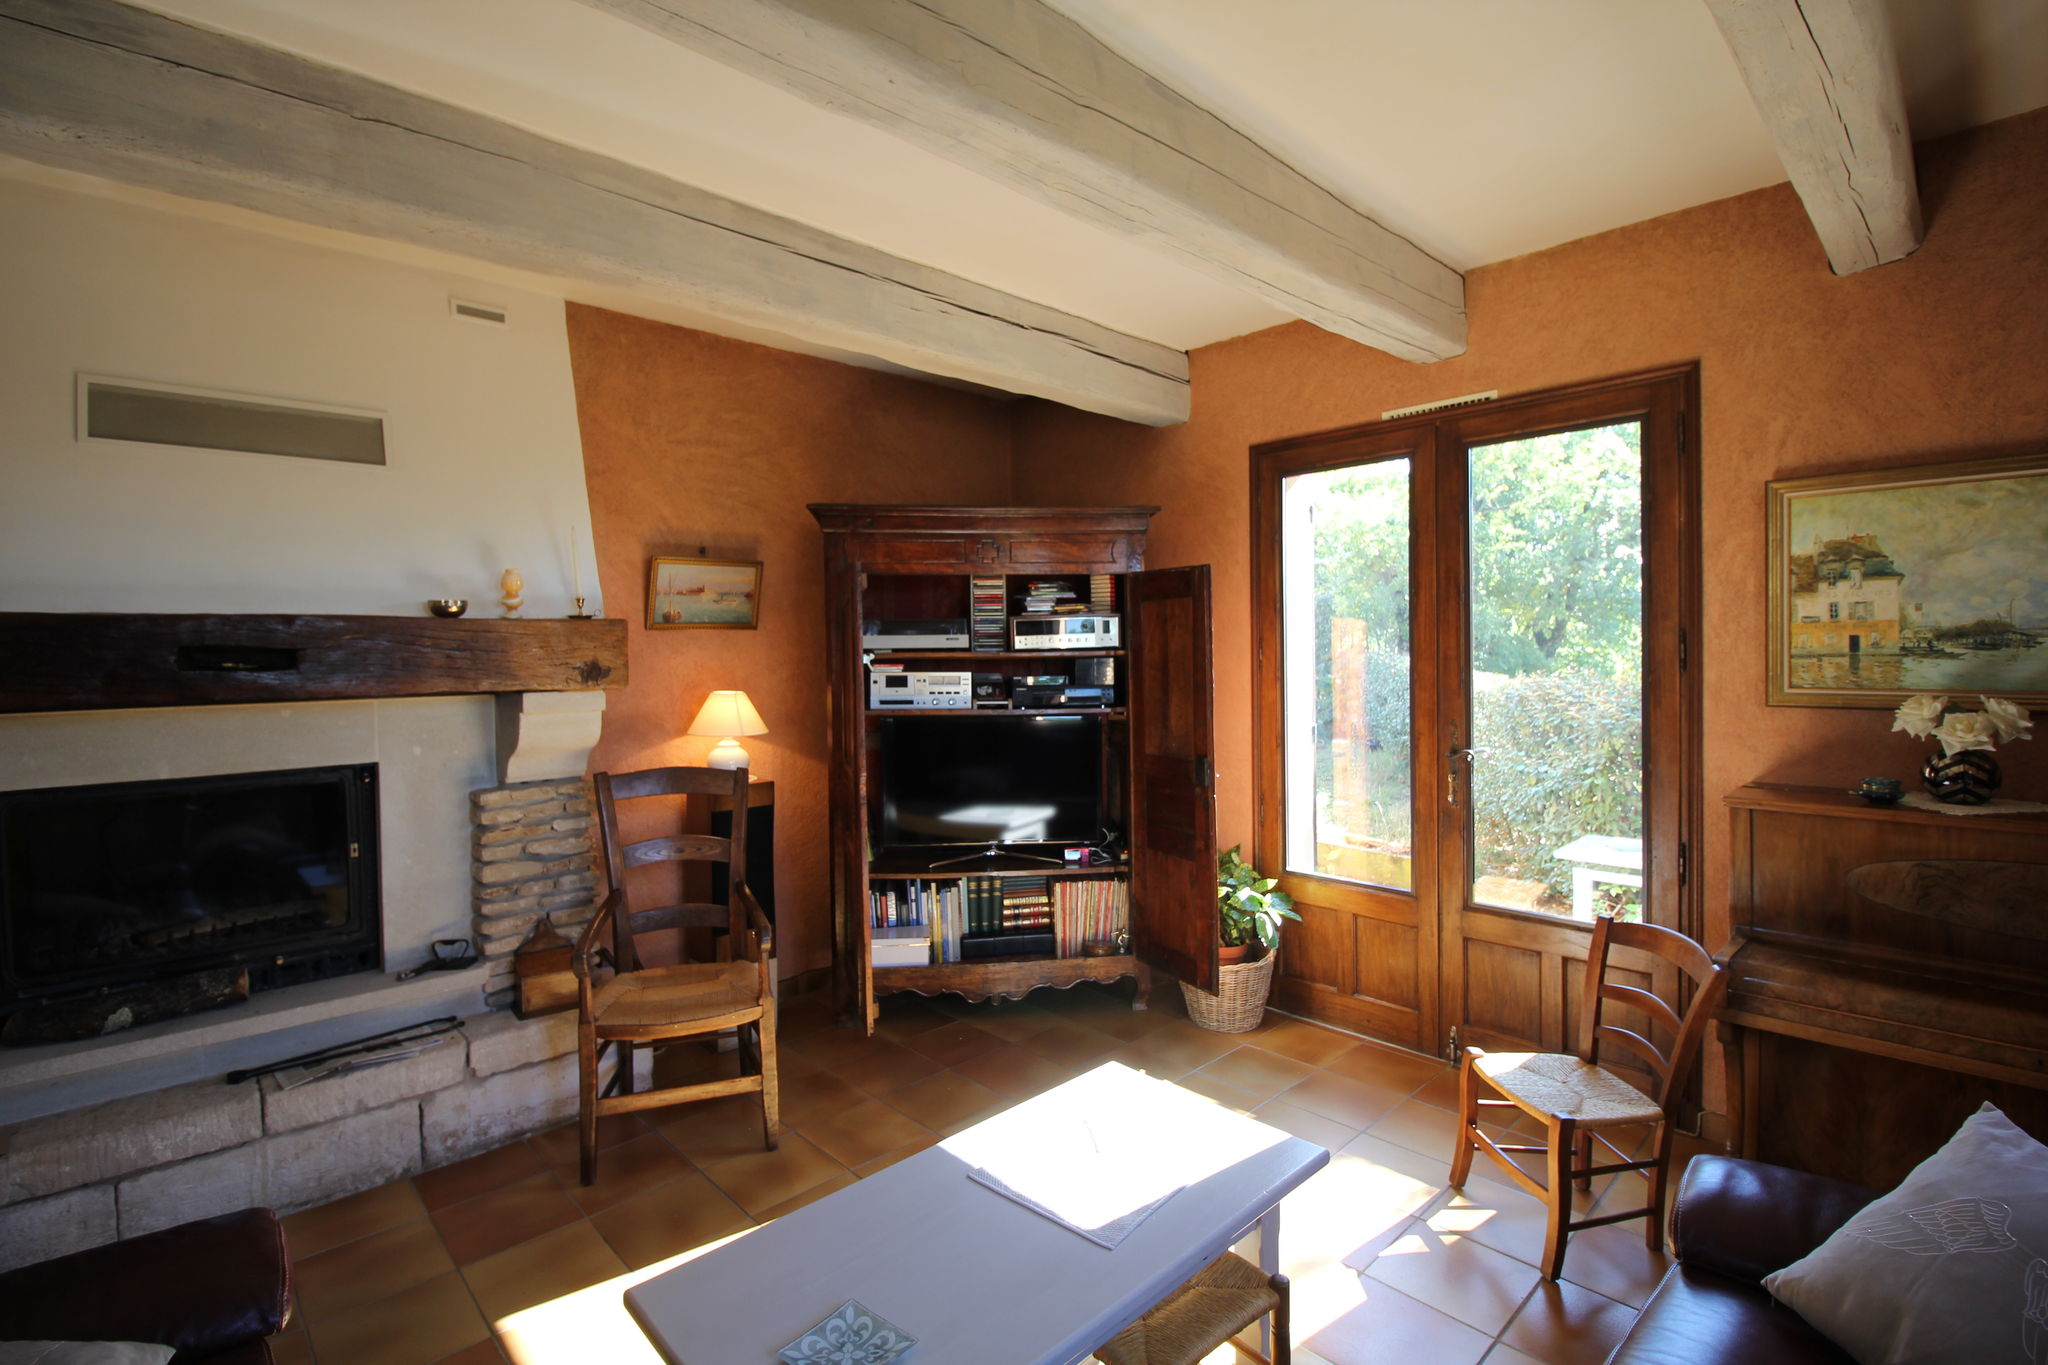 Detached holiday home with private pool in the village of Roussillon